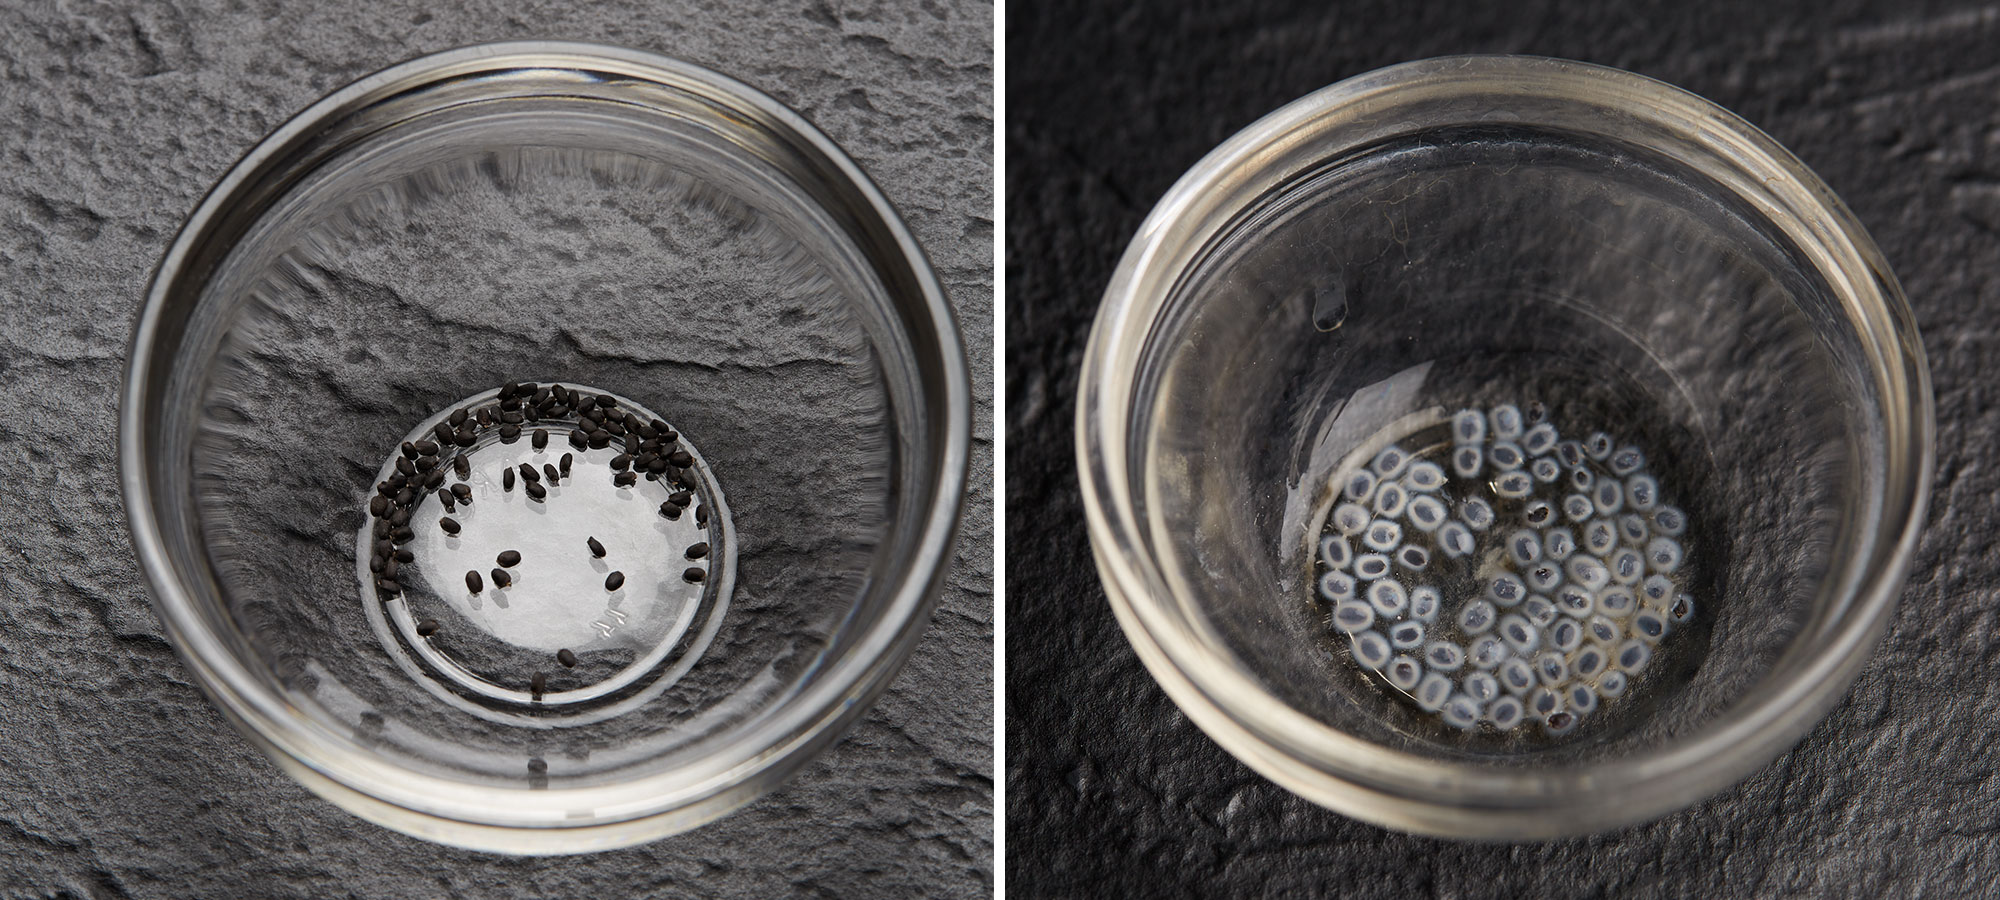 Left: Basil seeds. Right: Soaked basil seeds.